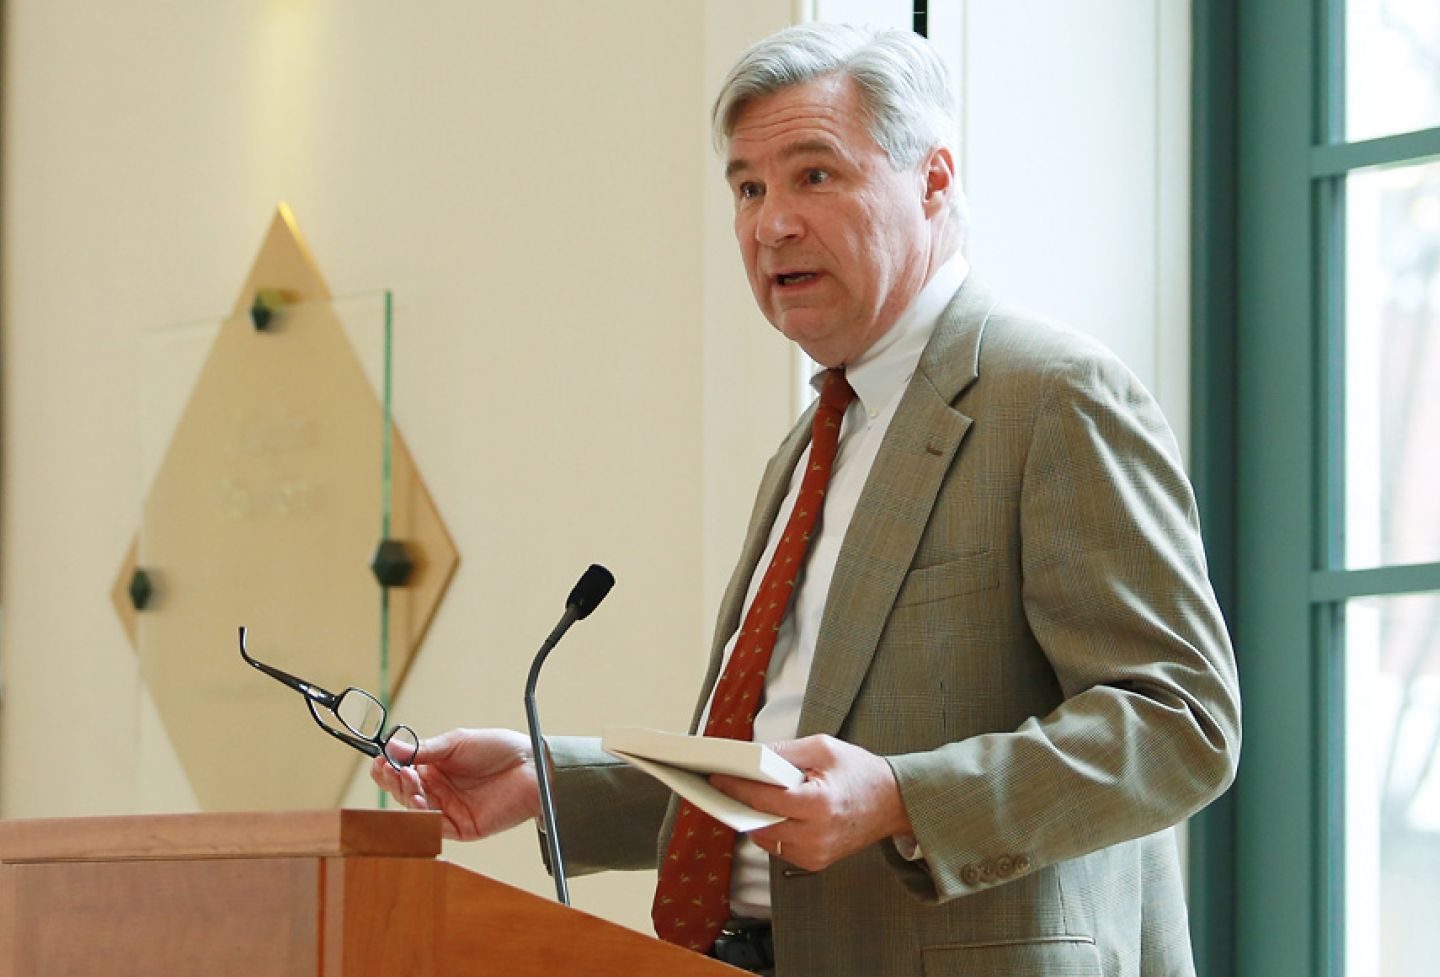 The courts may be an avenue to regain traction on climate change, U.S. Sen. Sheldon Whitehouse ’82 said in April at the Law School during the annual Lillian K. Stone Distinguished Lecture.